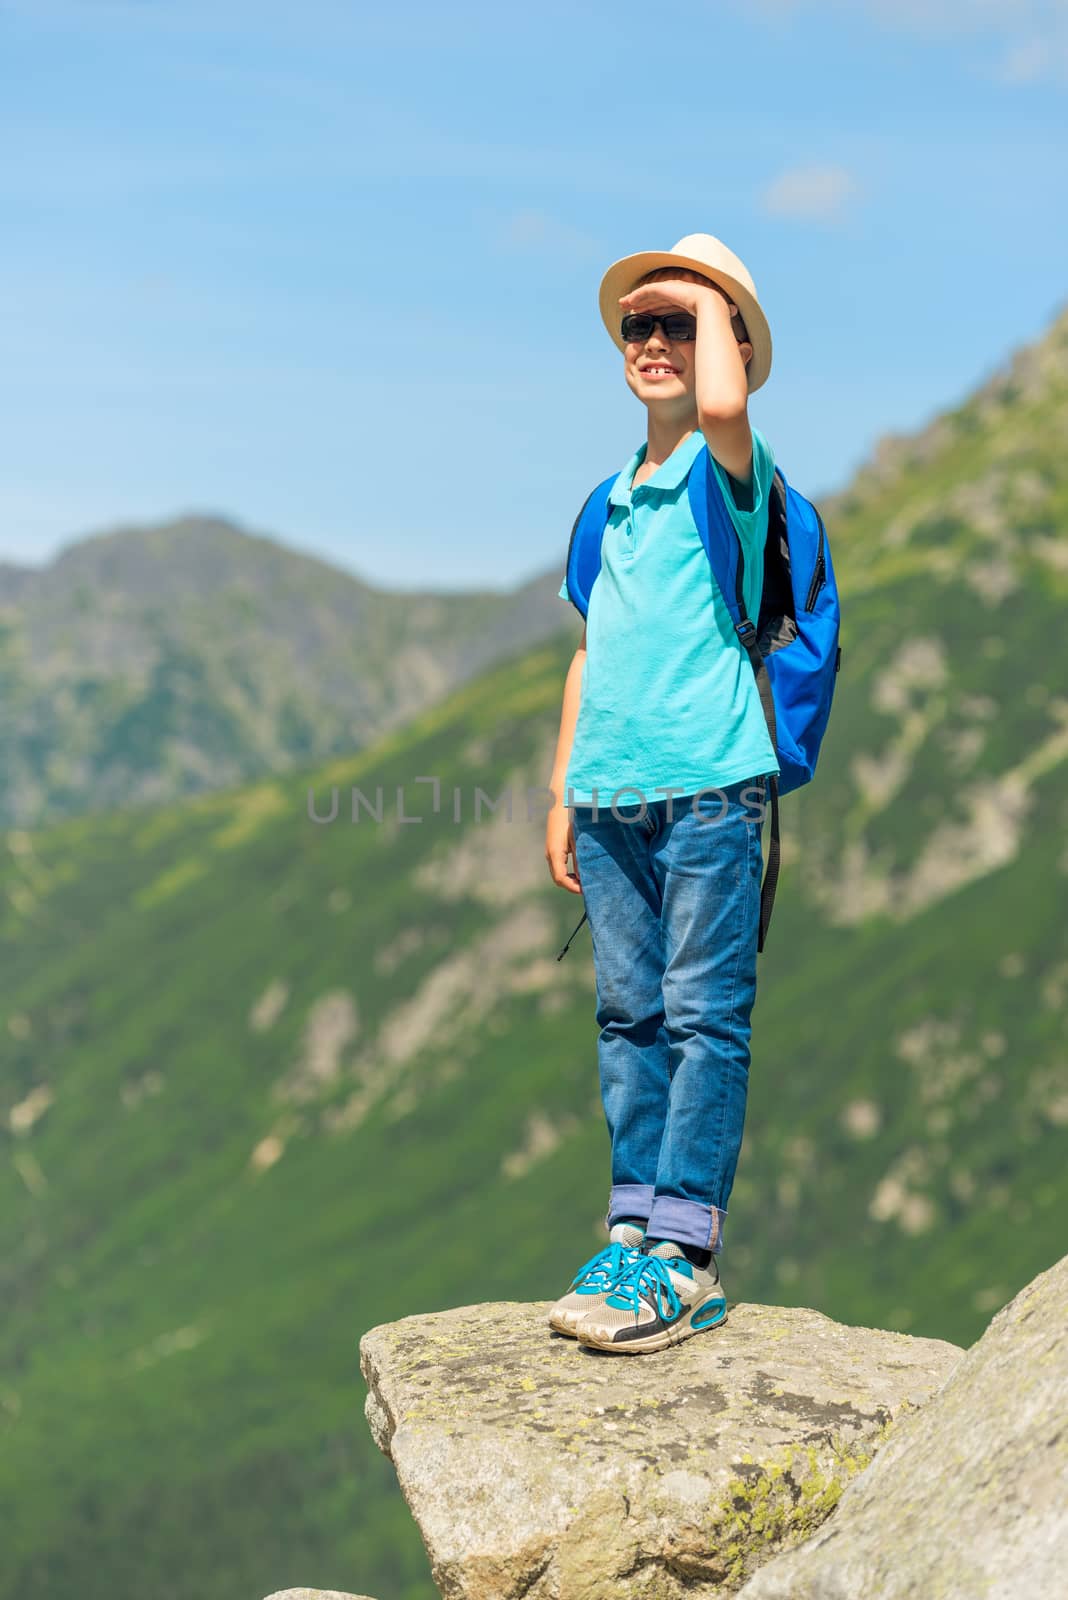 schoolboy traveler with a backpack high in the mountains on a ro by kosmsos111